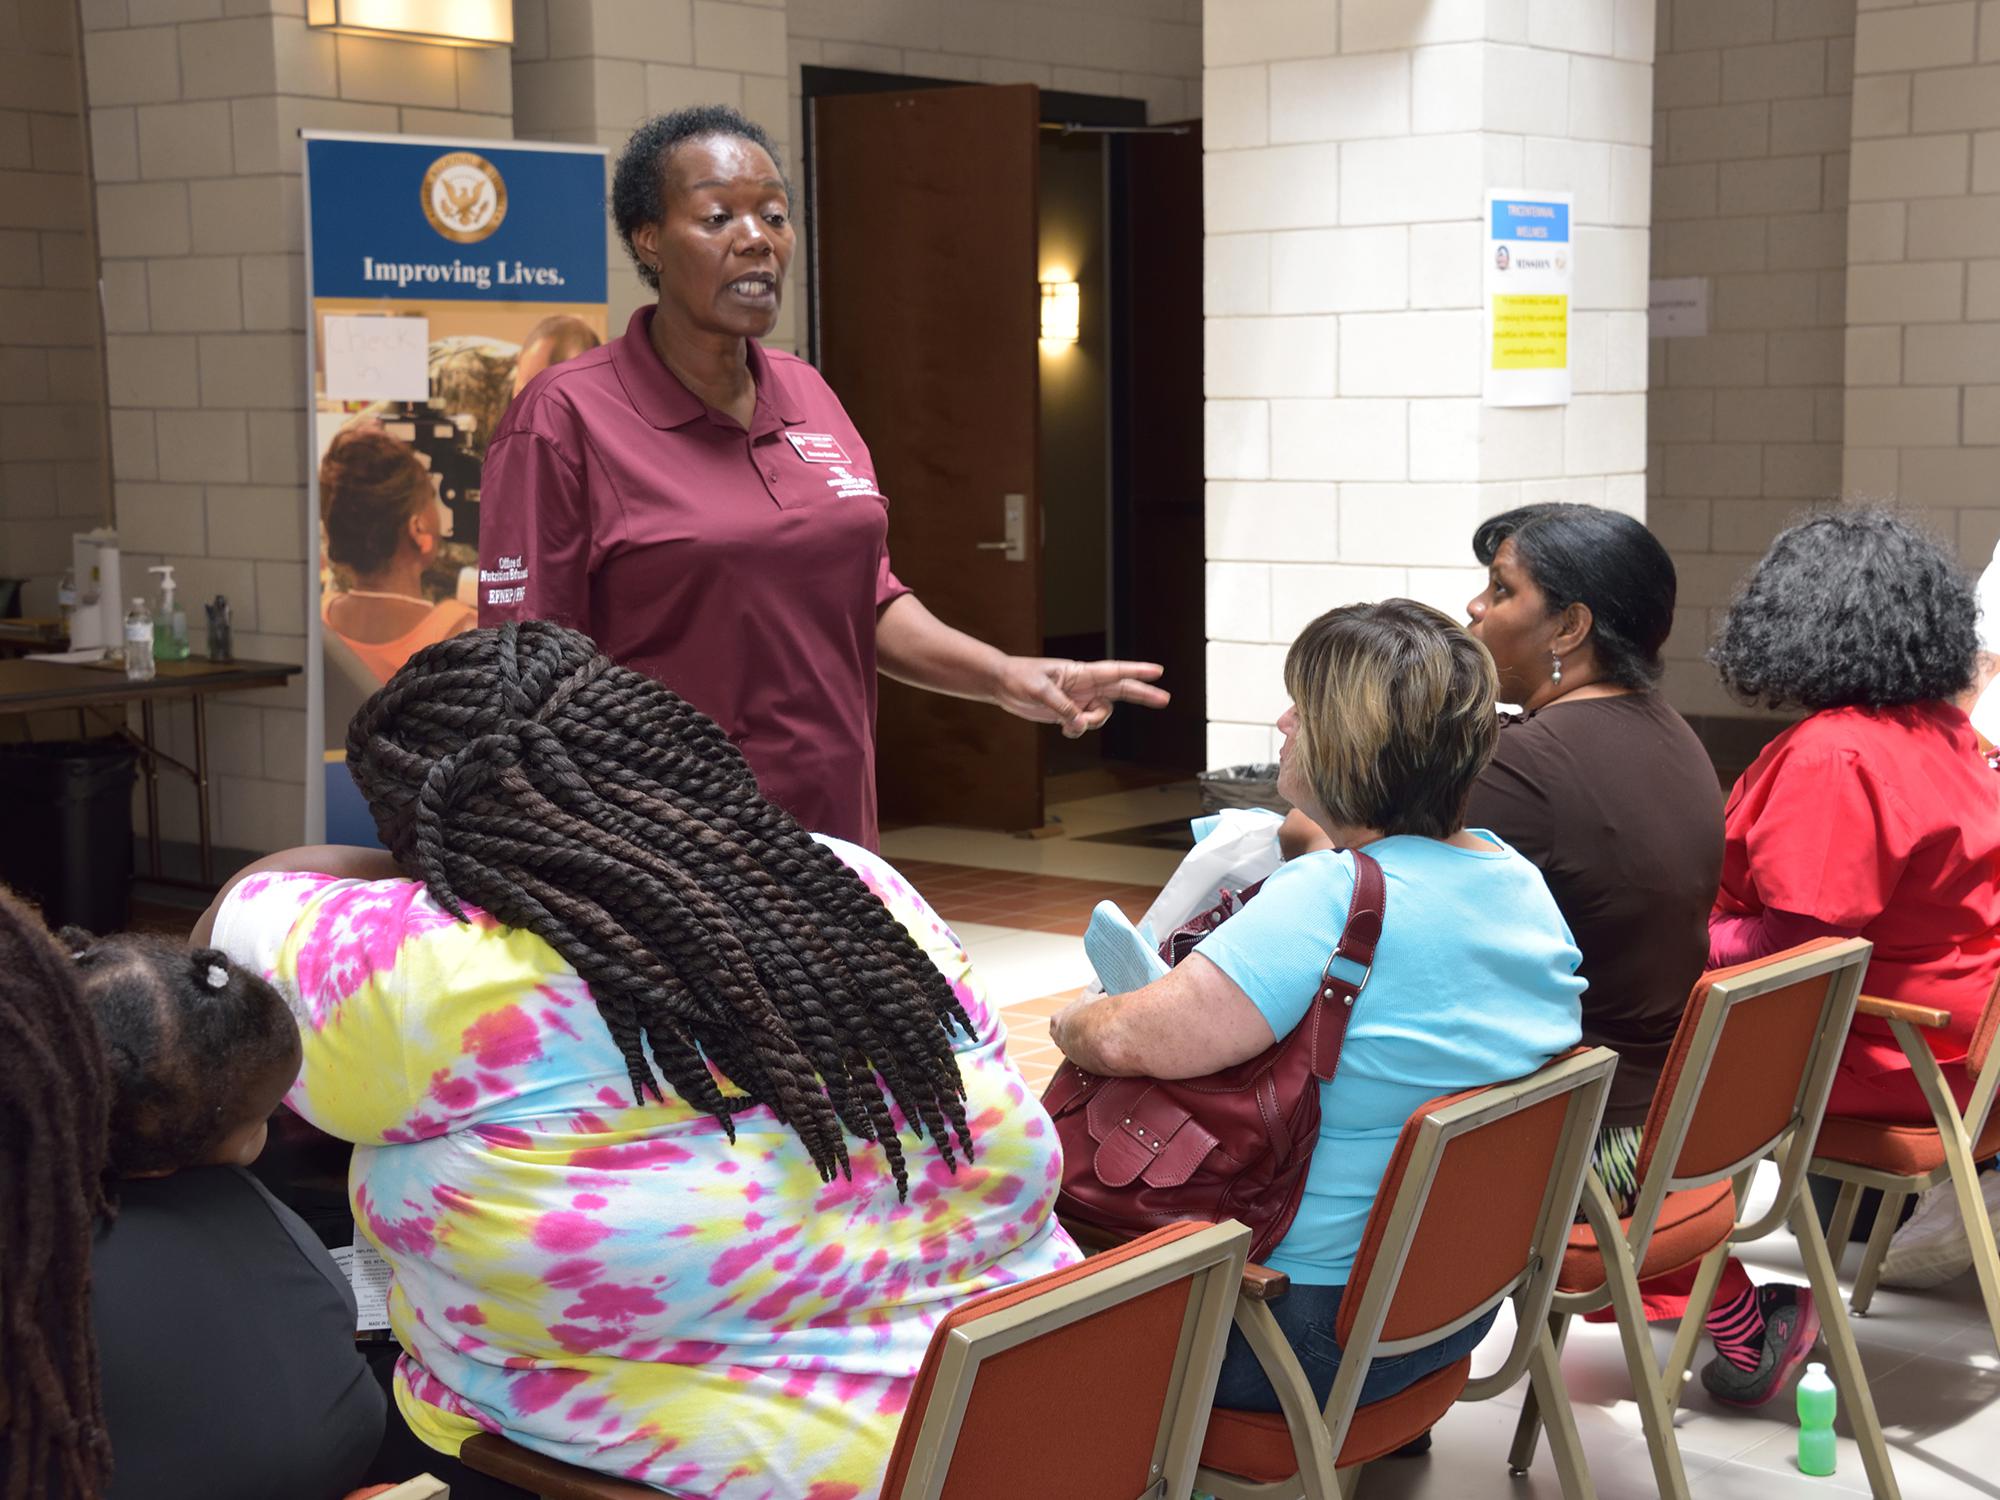 Dannie Bolden, Wilkinson County nutrition educator with the Mississippi State University Extension Service, speaks to participants of the wellness event about reducing fat and sugars in their diets in Natchez, Mississippi, on Aug. 9, 2016. (Photo by MSU Extension Service/Kevin Hudson)